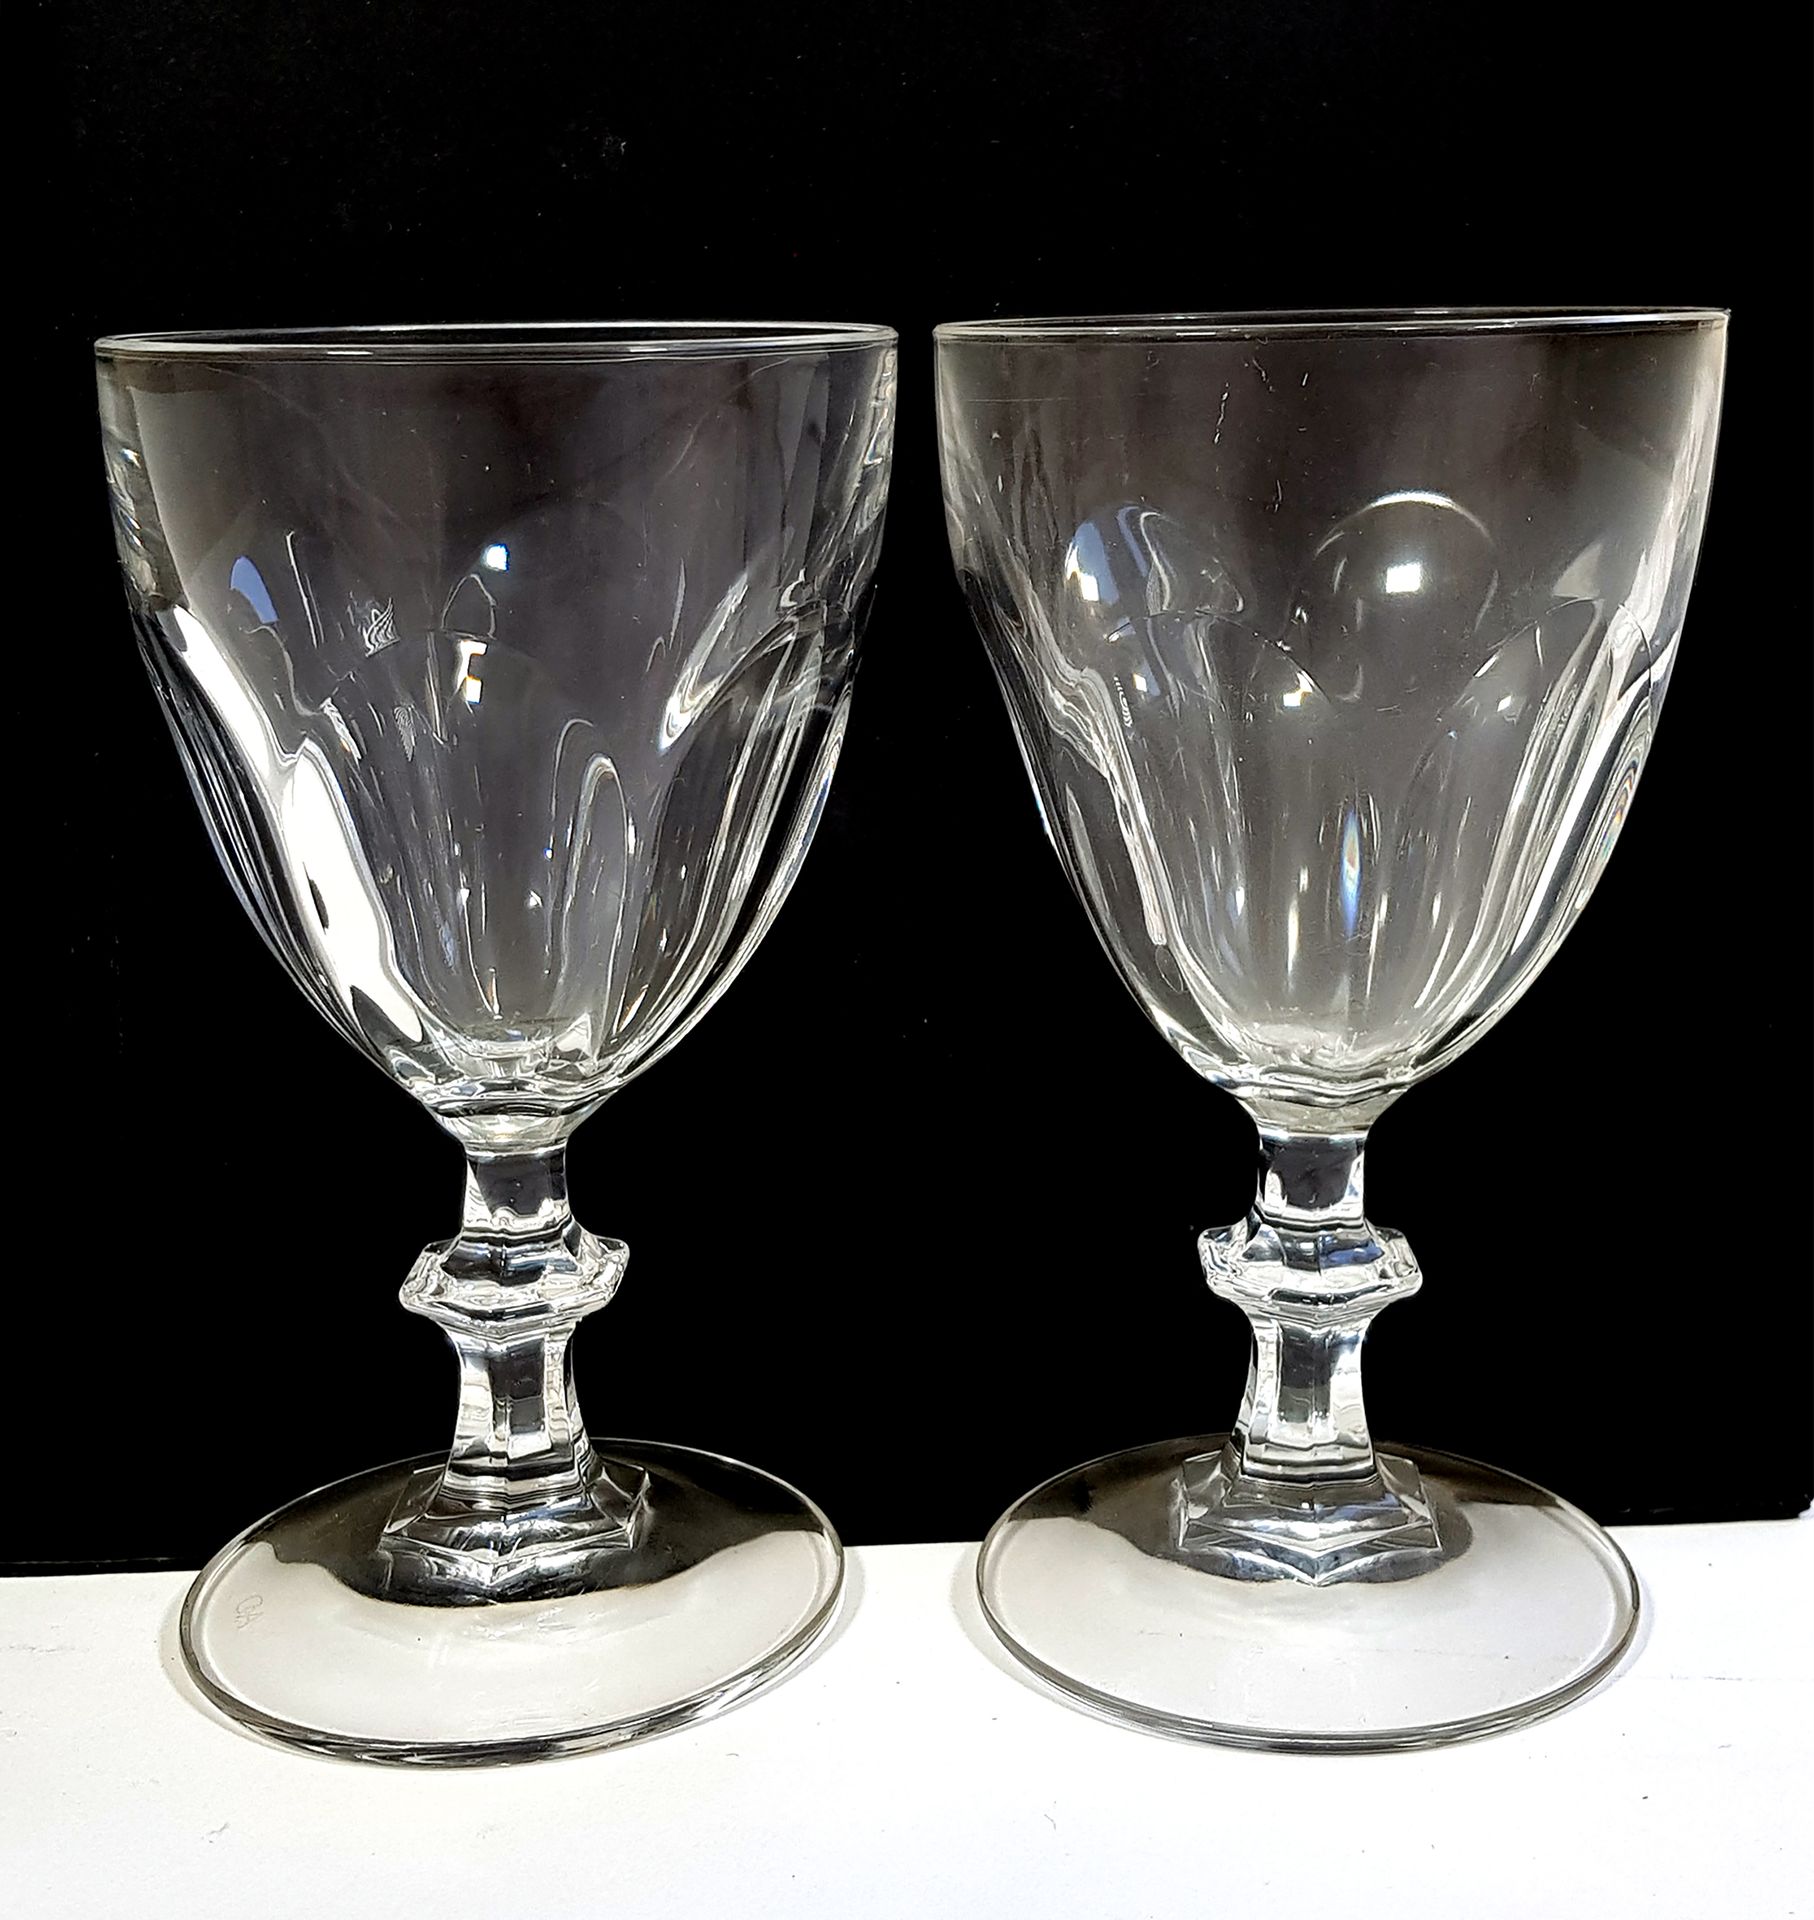 Null CRYSTAL OF ARQUES

Part of service of crystal glasses including eleven wate&hellip;